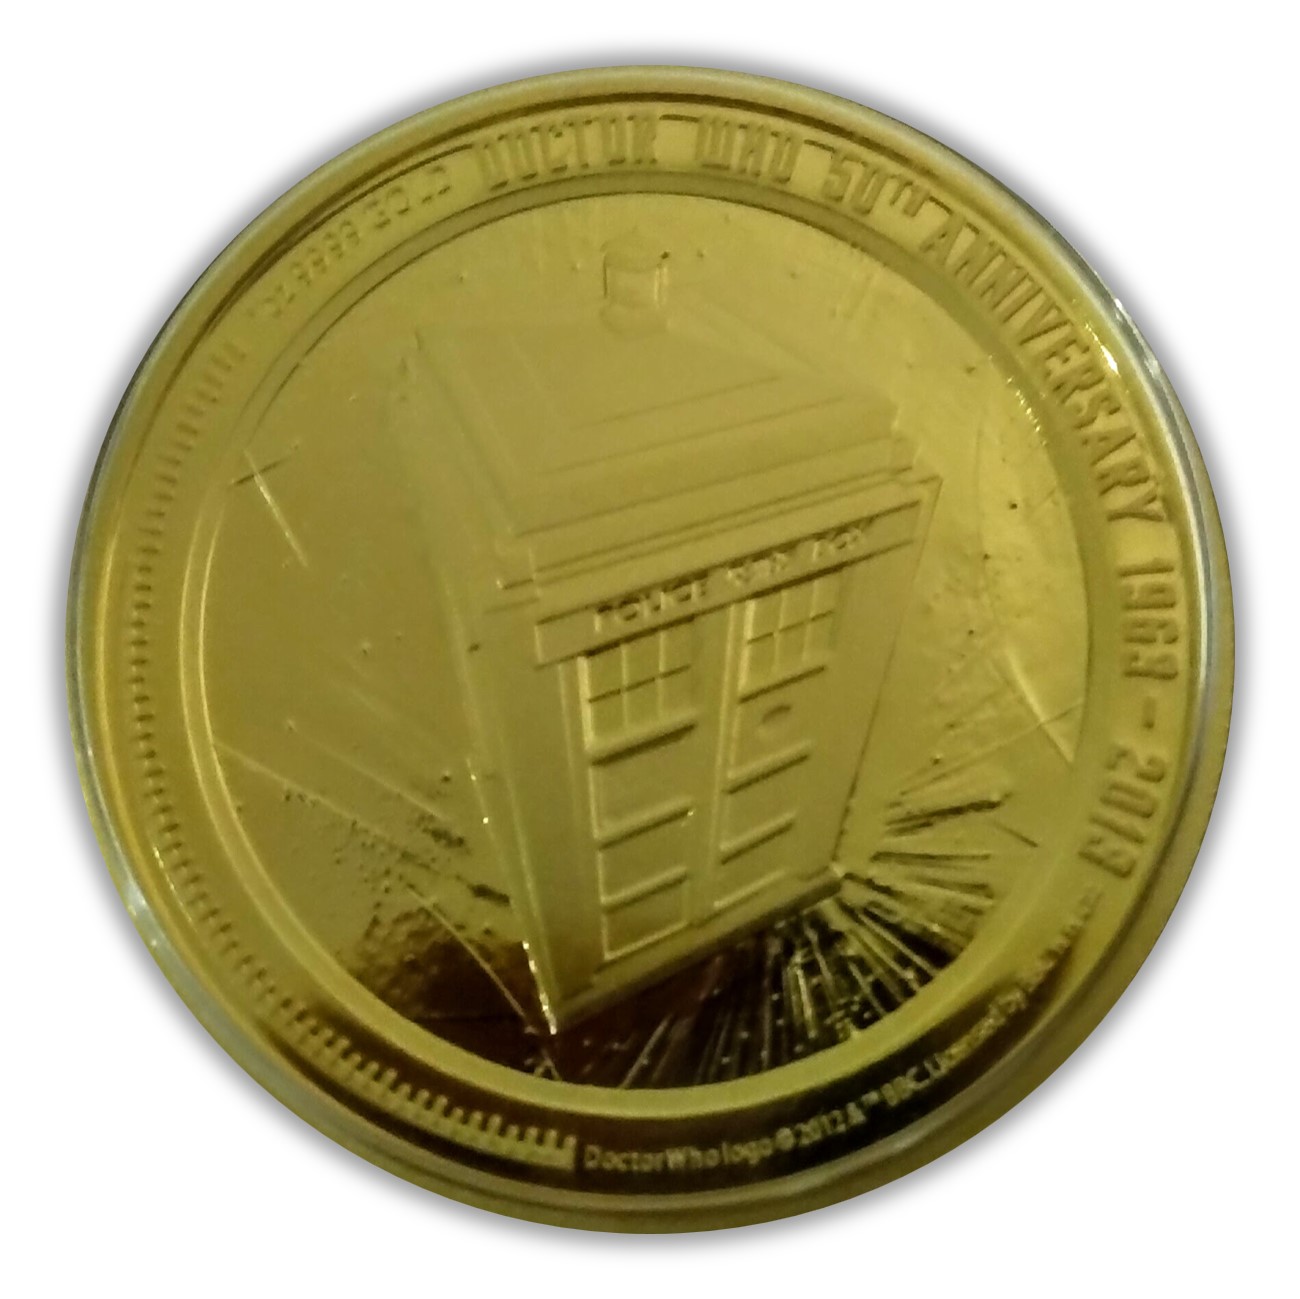 2013 Niue Doctor Who $200 Two Hundred Dollar Gold Proof Coin